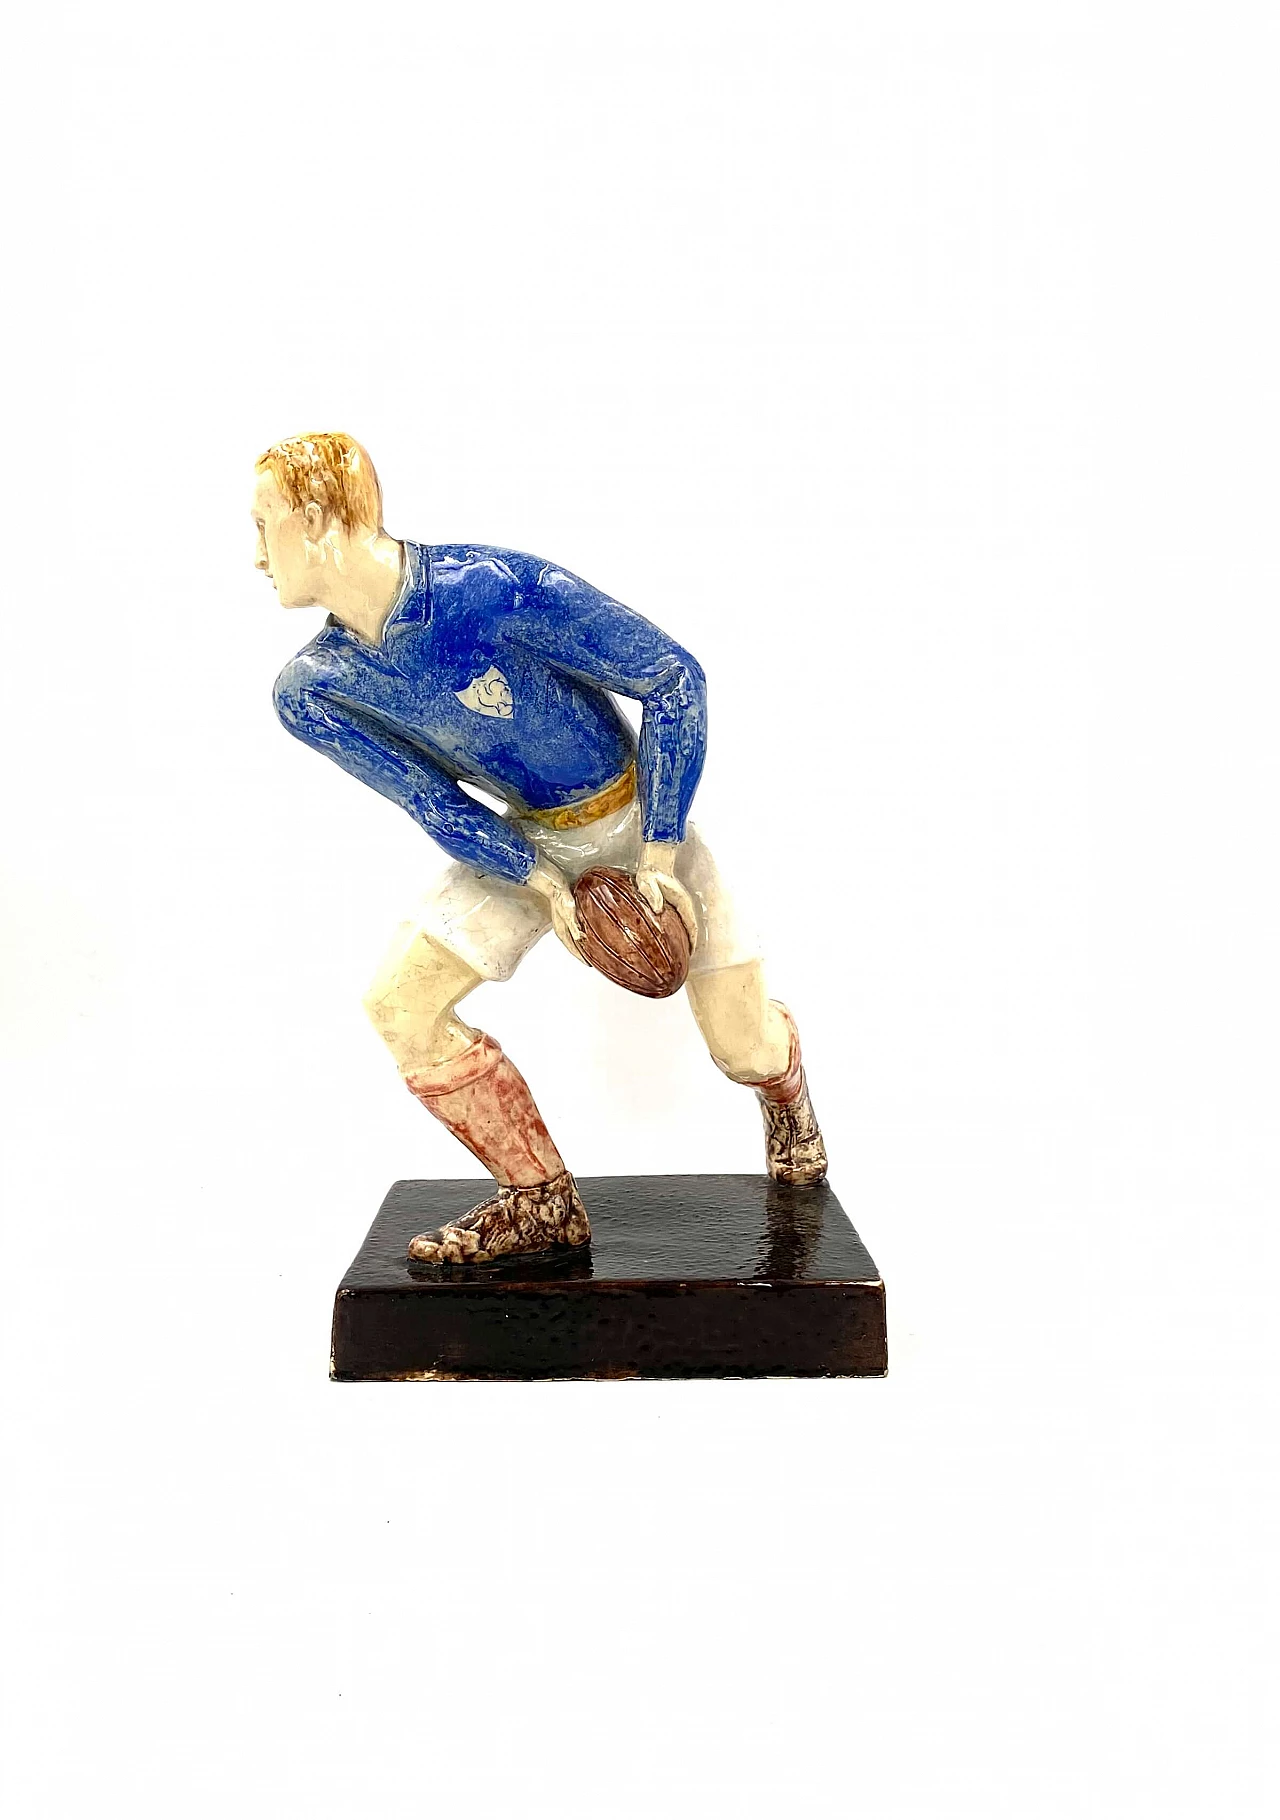 Willy Wuilleumier, scultura Les joueurs de rugby, GAM, Francia, 1940 1277369